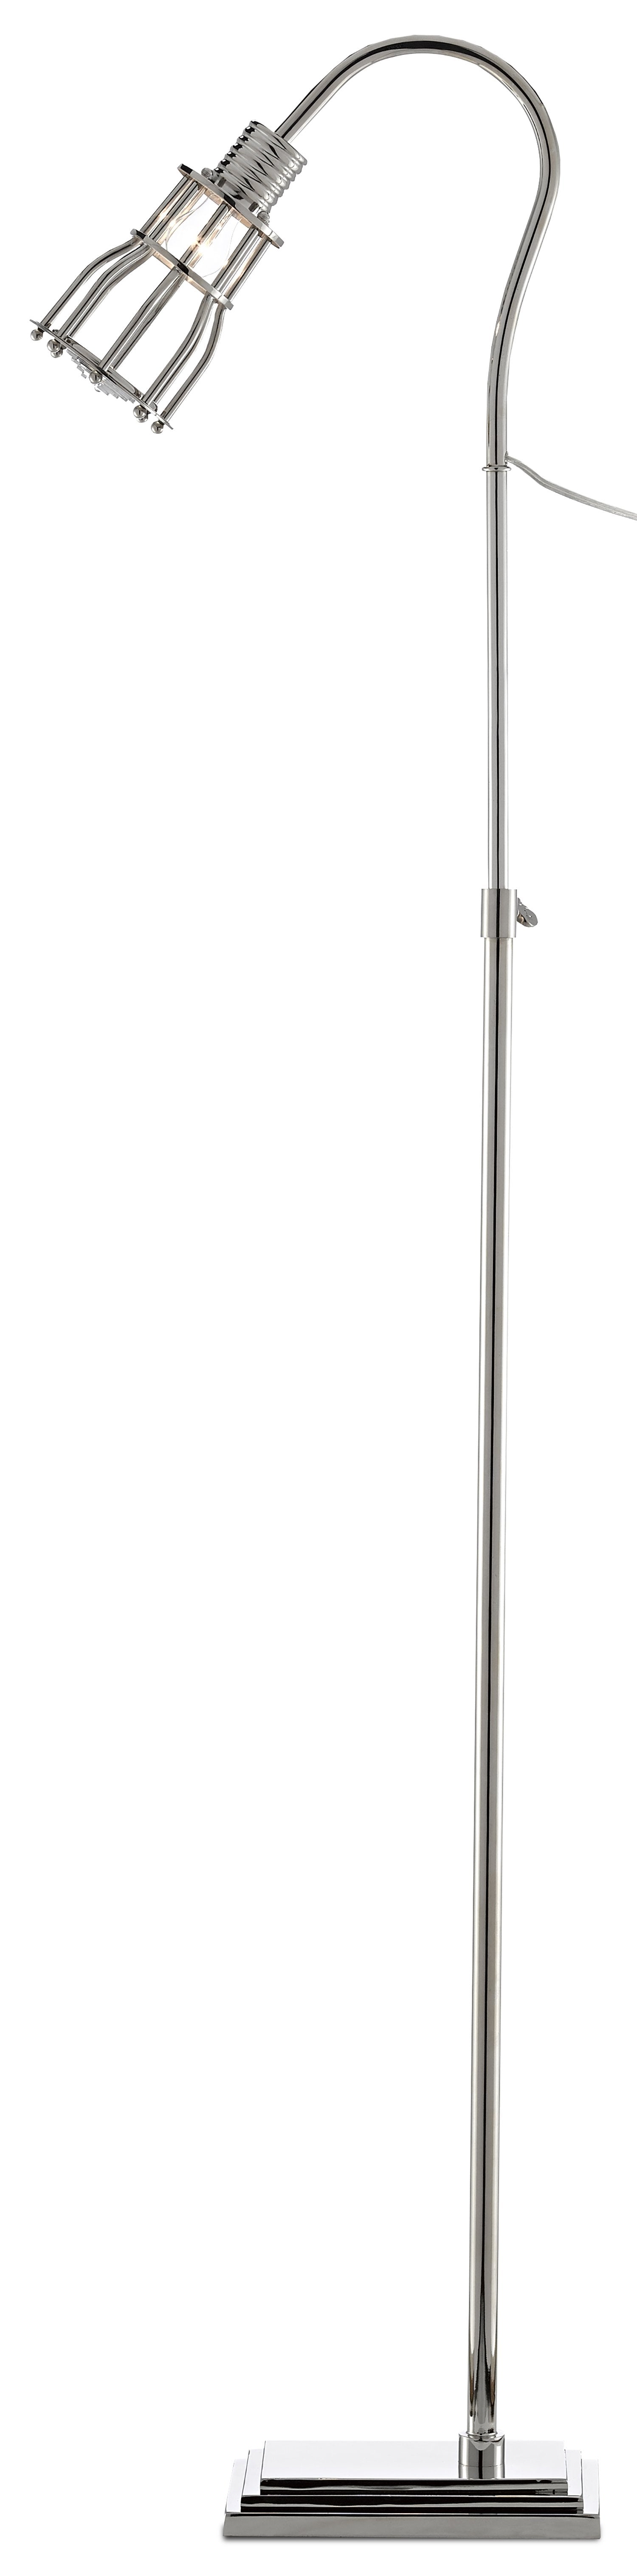 Davy Articulated Floor Lamp by Currey and Company